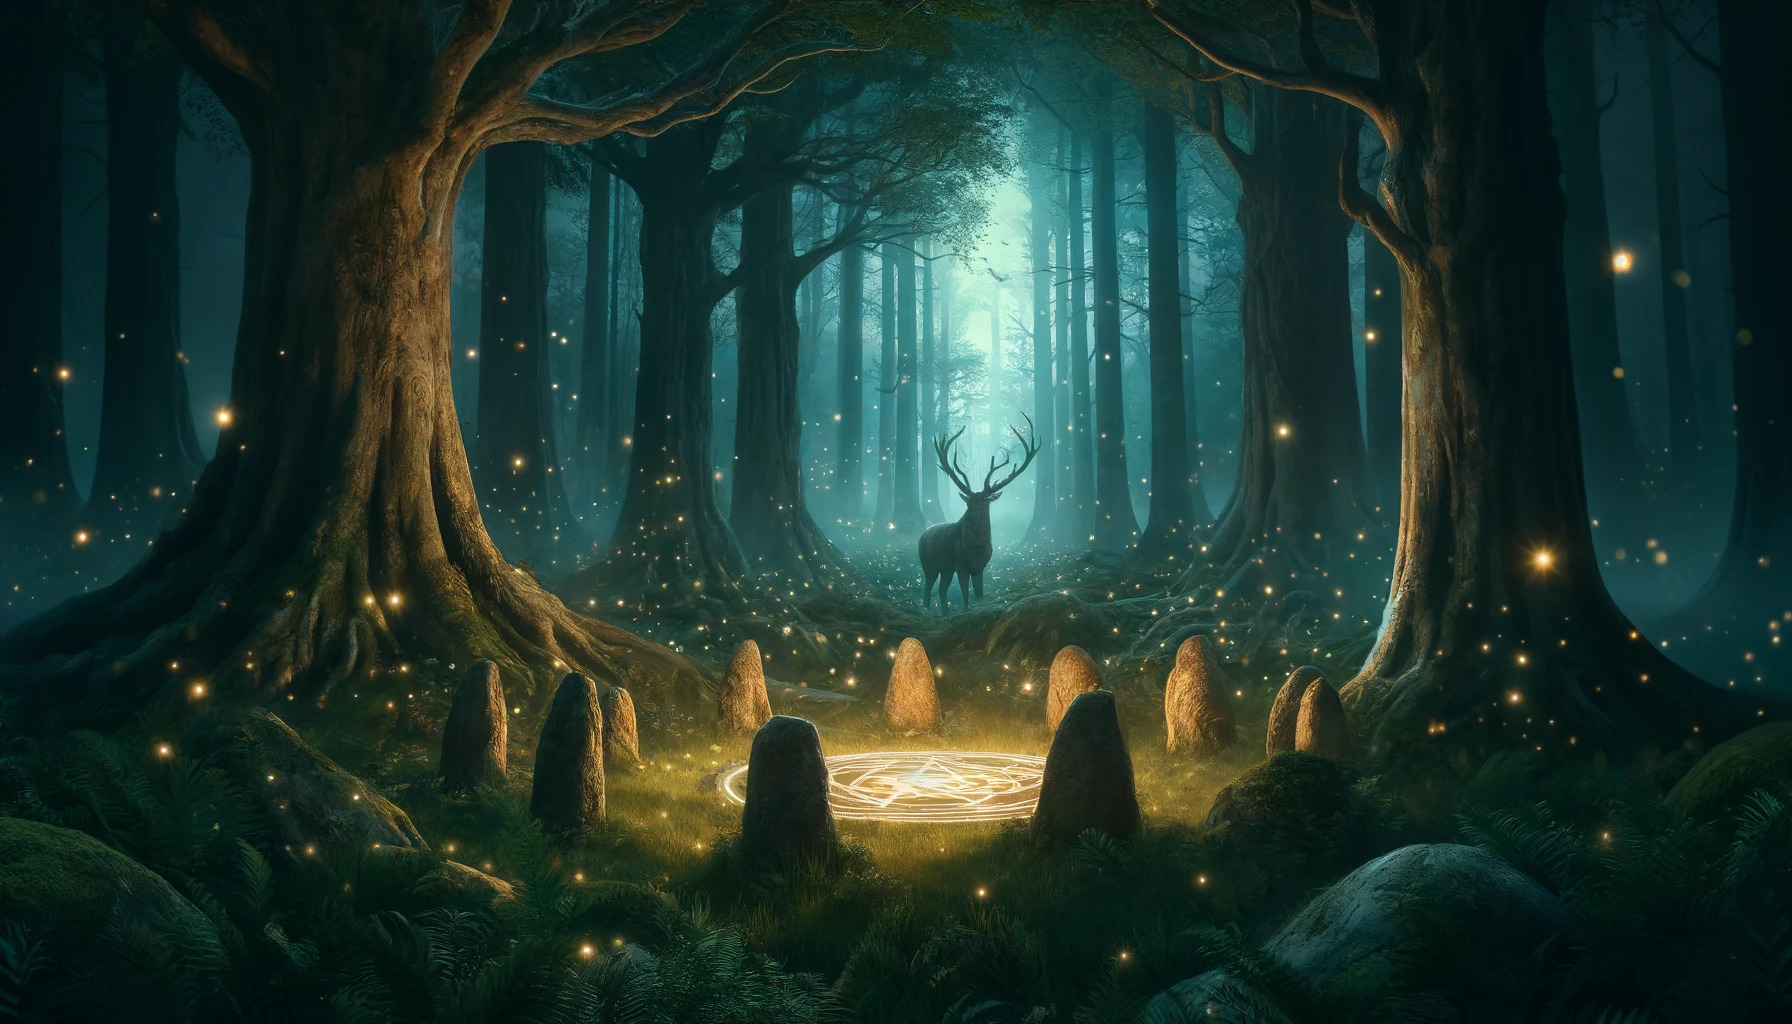 a cinematic image inspired by Druid Names, capturing a mystical forest at twilight filled with ancient magic and wonder.